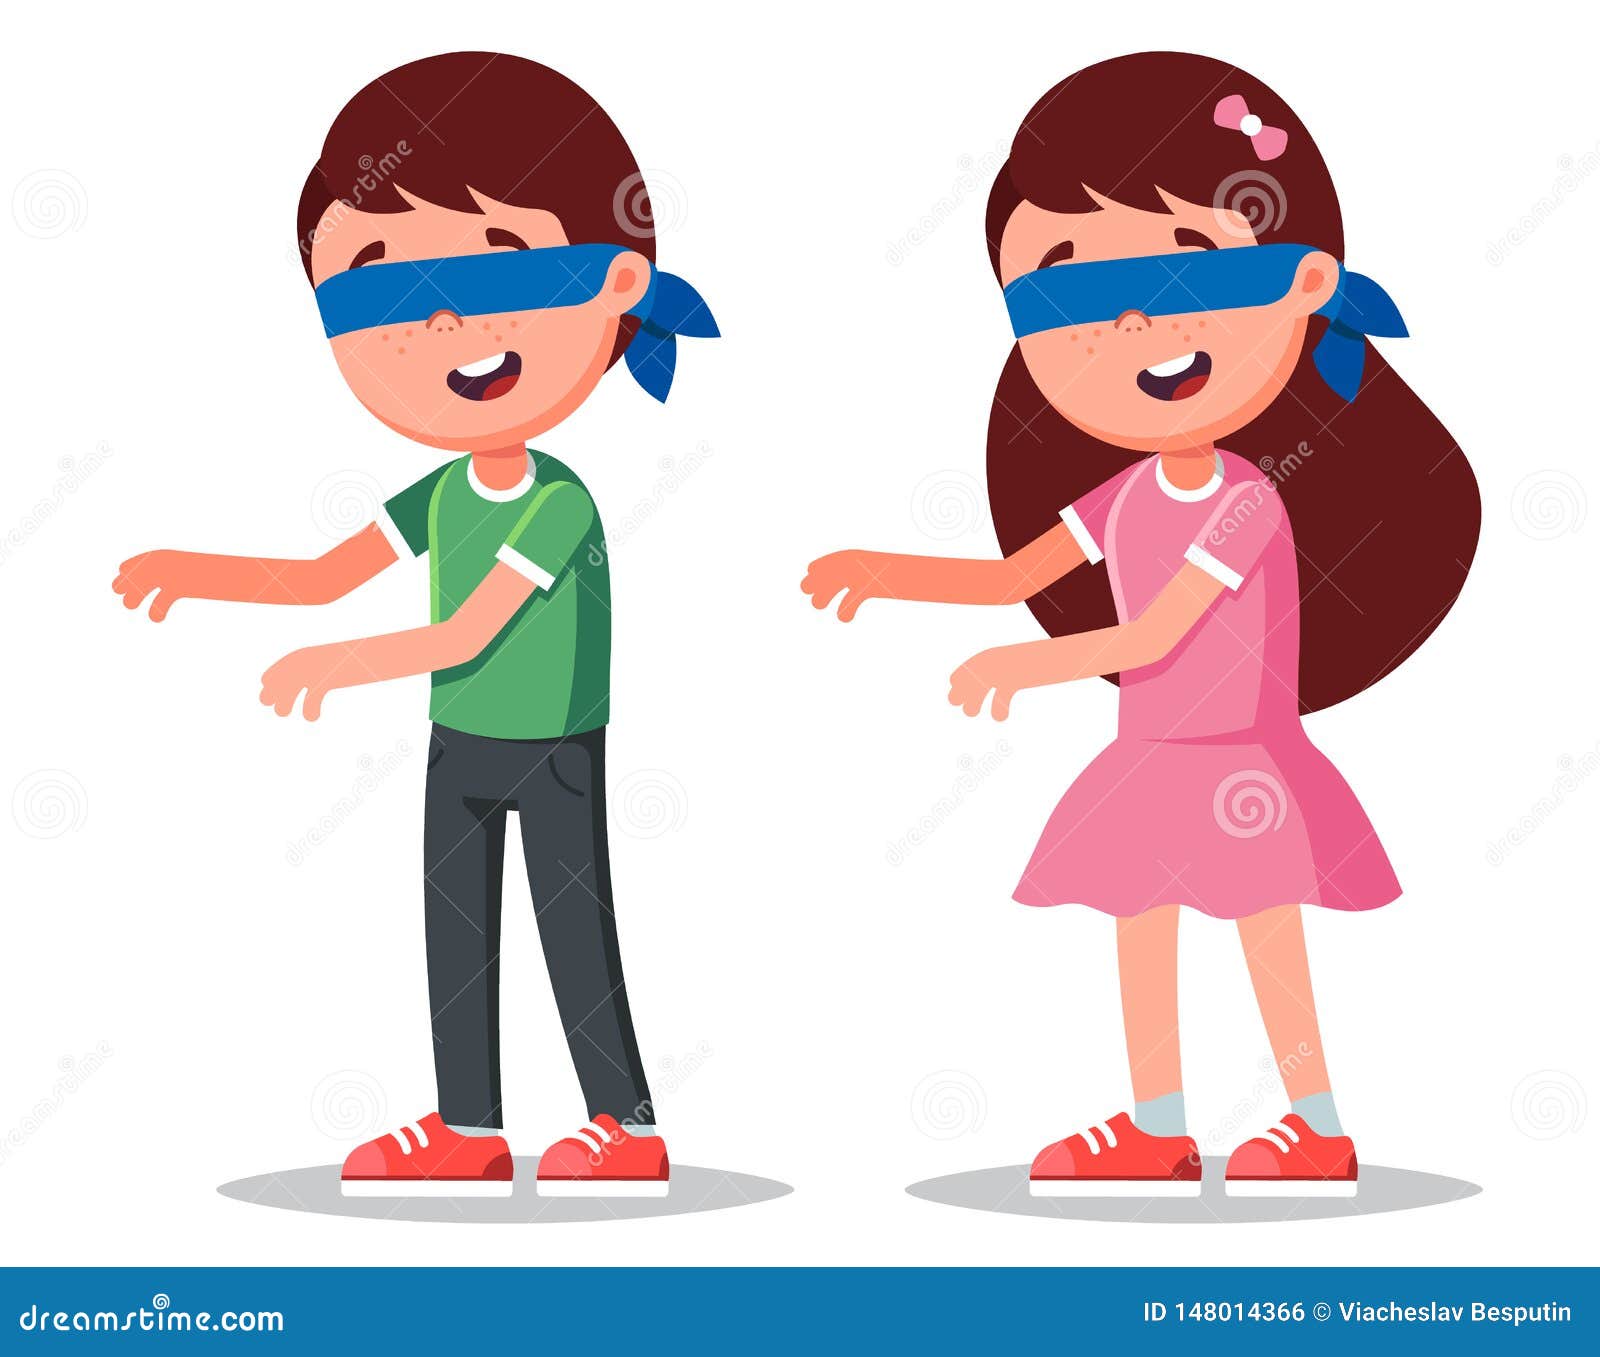 Characters Boy And Girl With Blindfold Play Children S Games